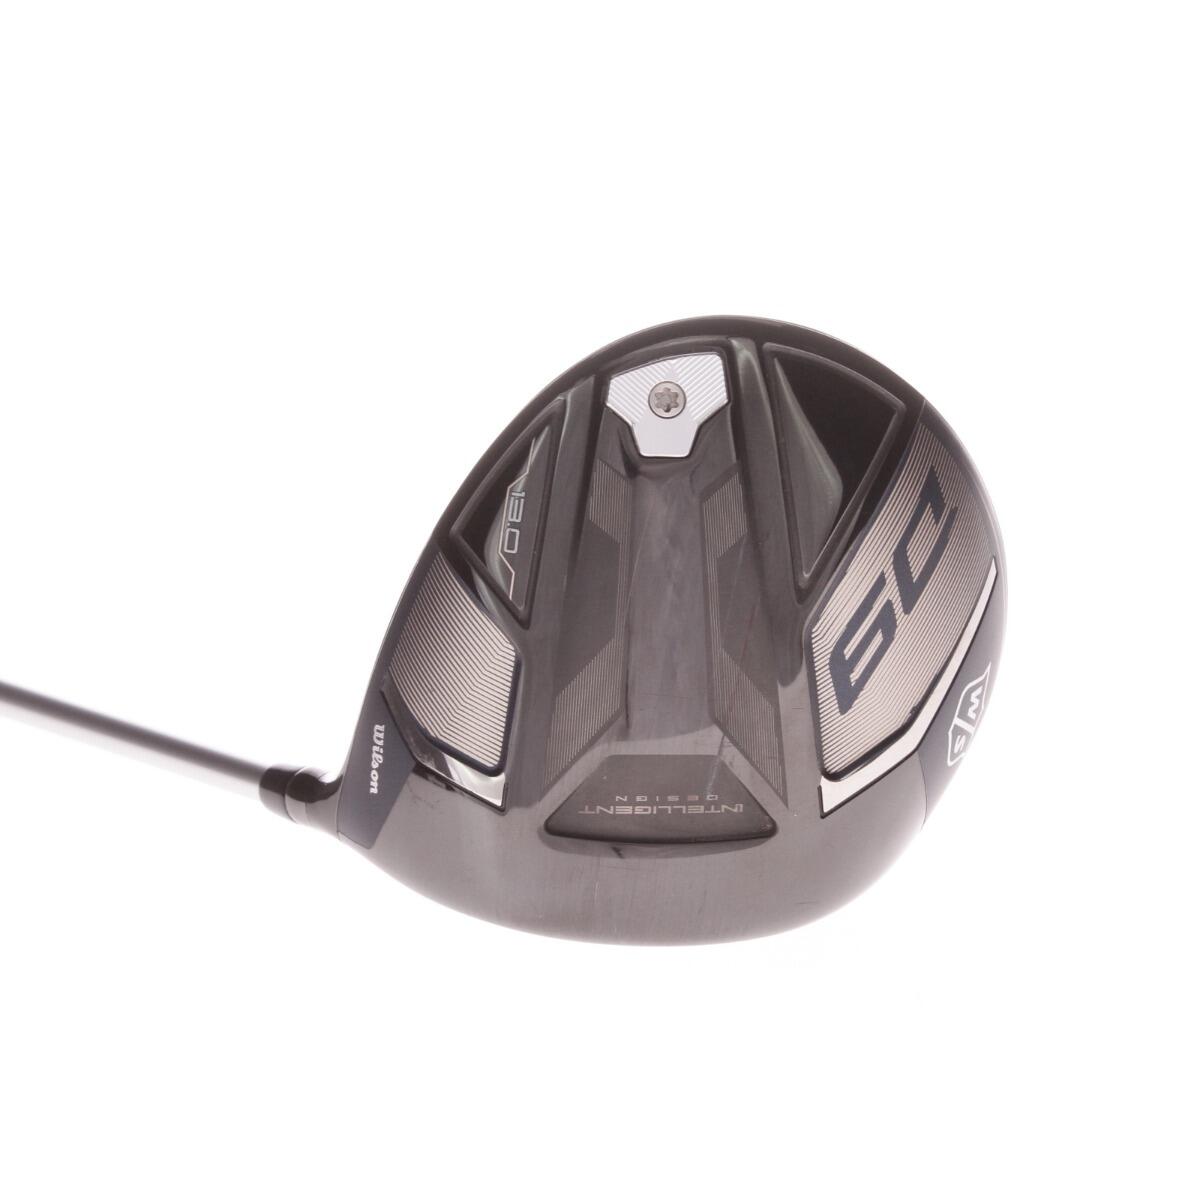 USED - Driver Wilson Staff D9 13 Degree Graphite Shaft Right Handed - GRADE B 2/7